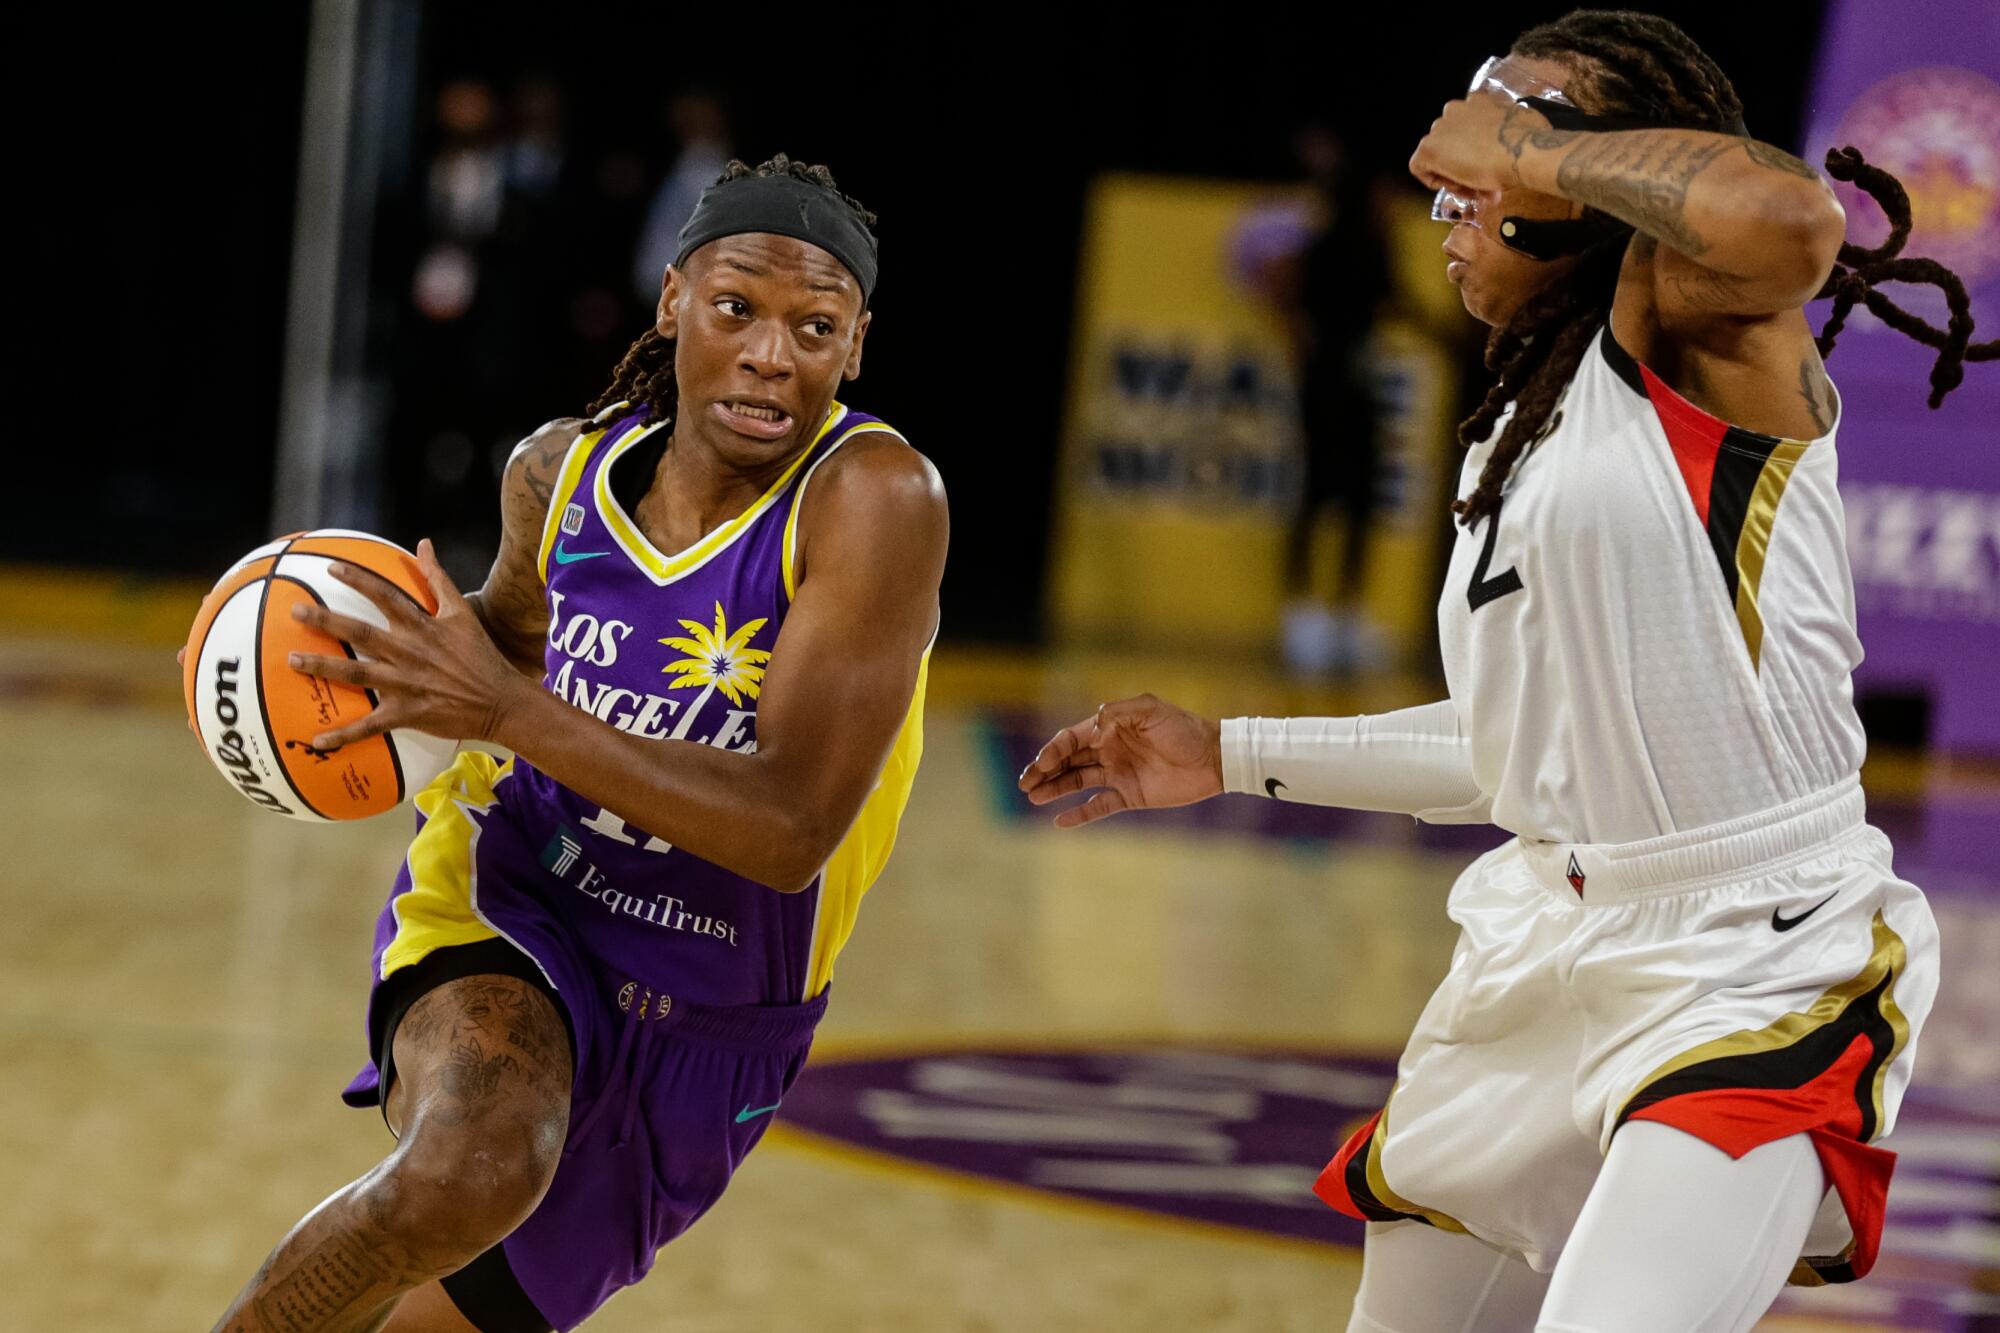 Sparks point guard Erica Wheeler handles the ball against a player for the Las Vegas Aces on June 30.